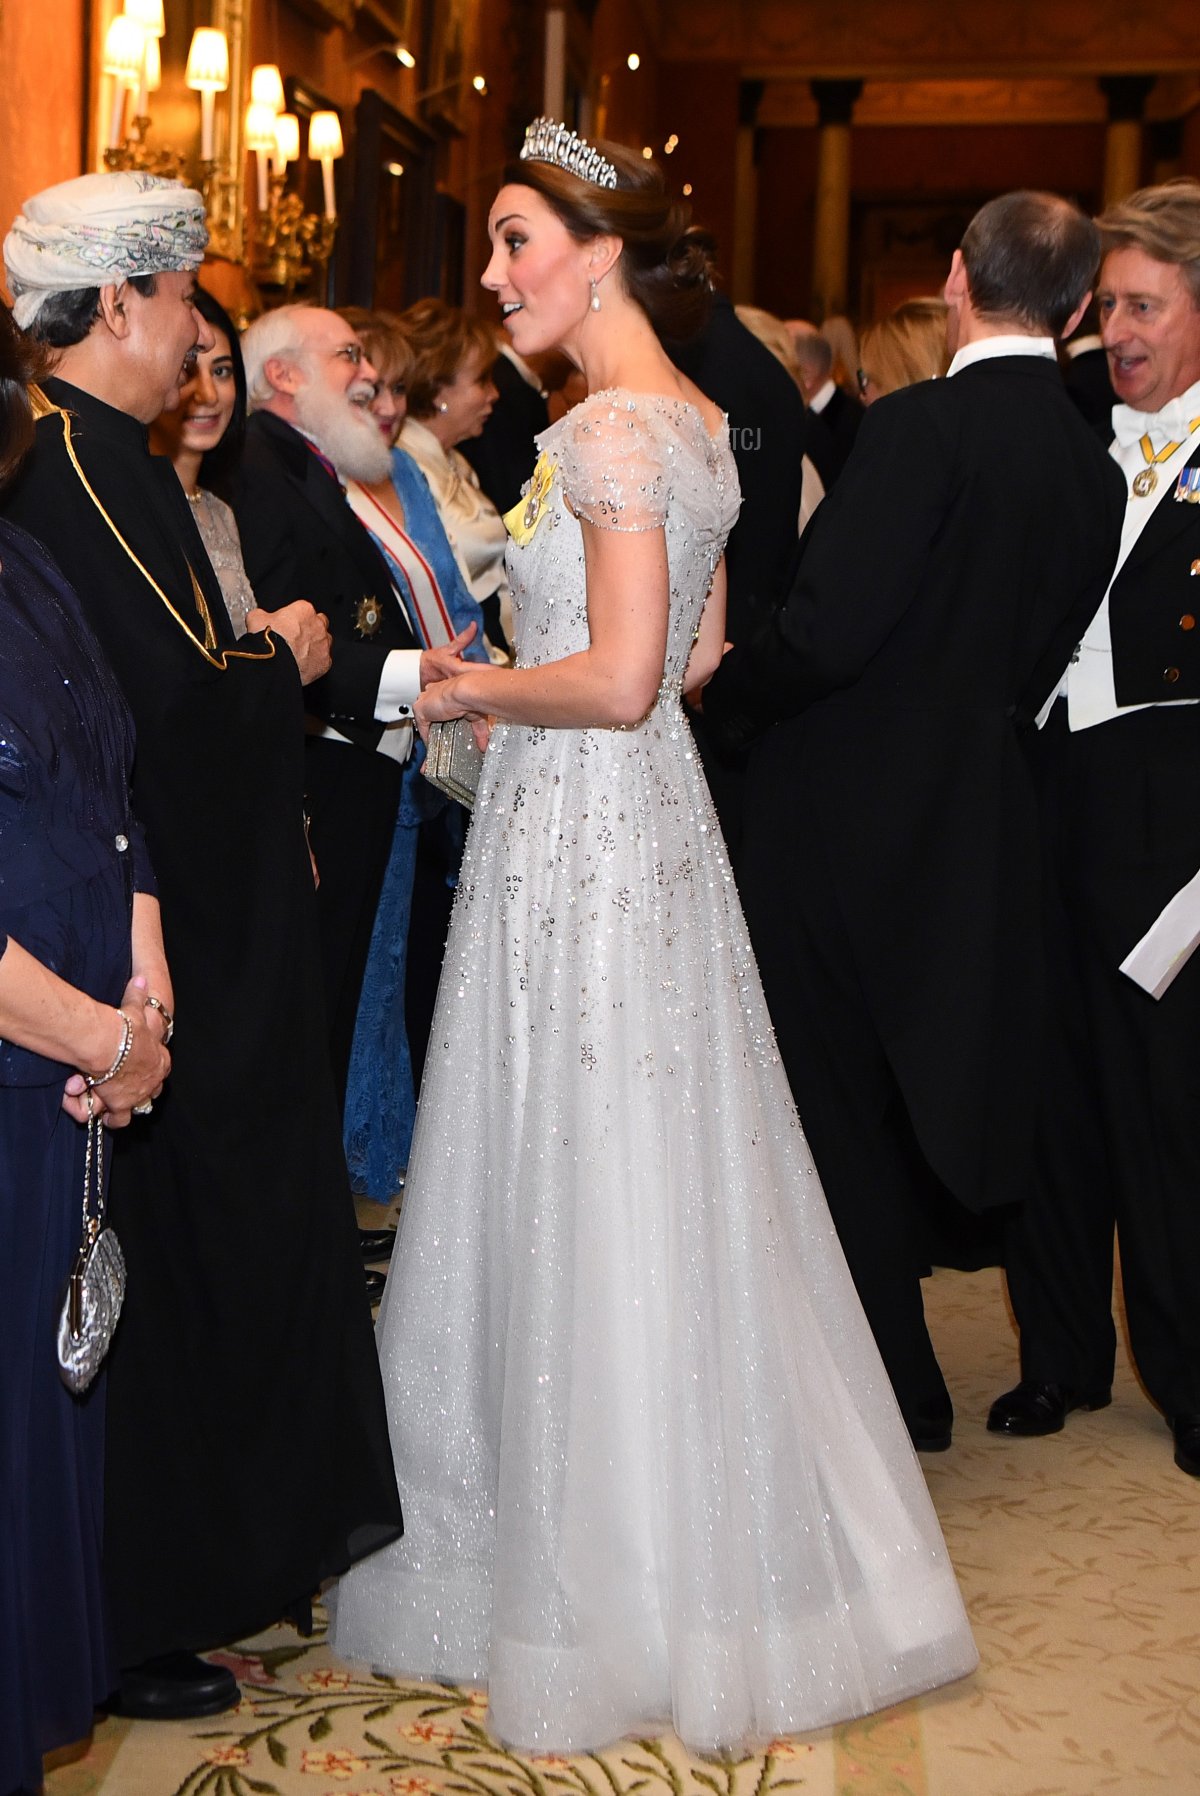 Catherine, Duchess of Cambridge greets guests at an evening reception for members of the Diplomatic Corps at Buckingham Palace on December 04, 2018 in London, England